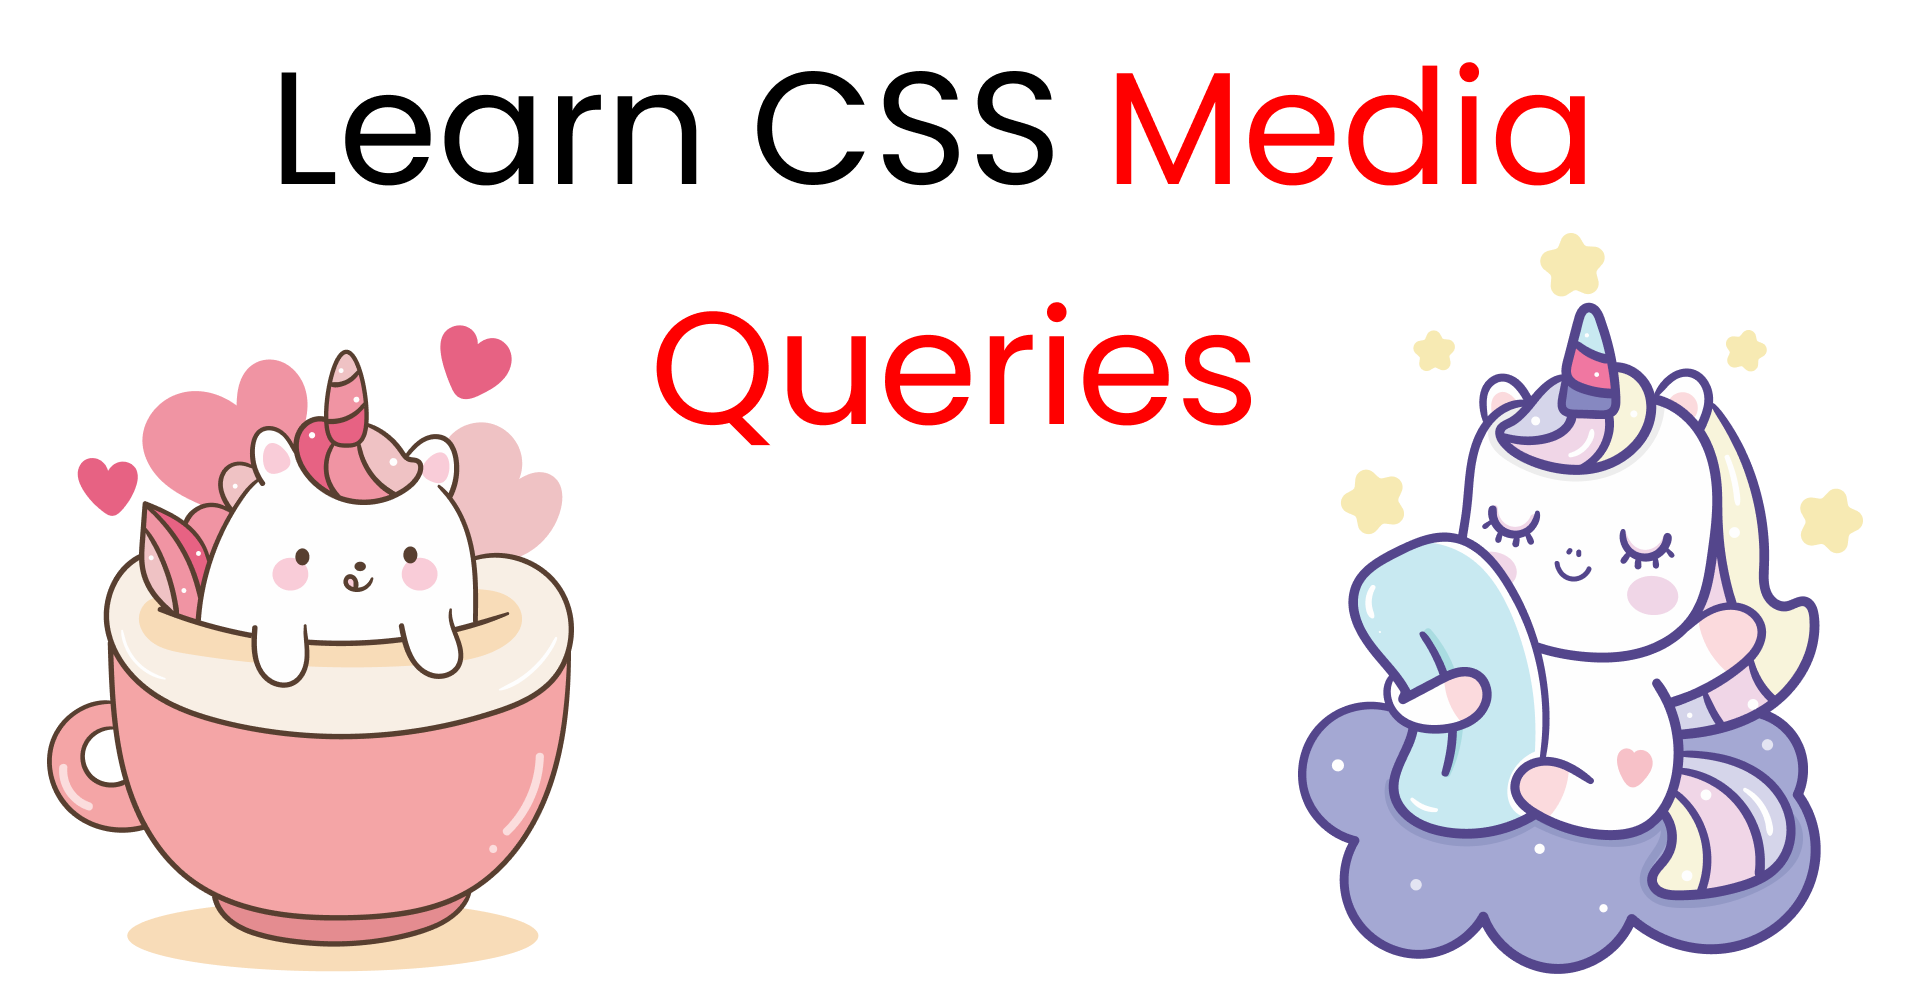 Learn CSS Media Queries by Building Three Projects